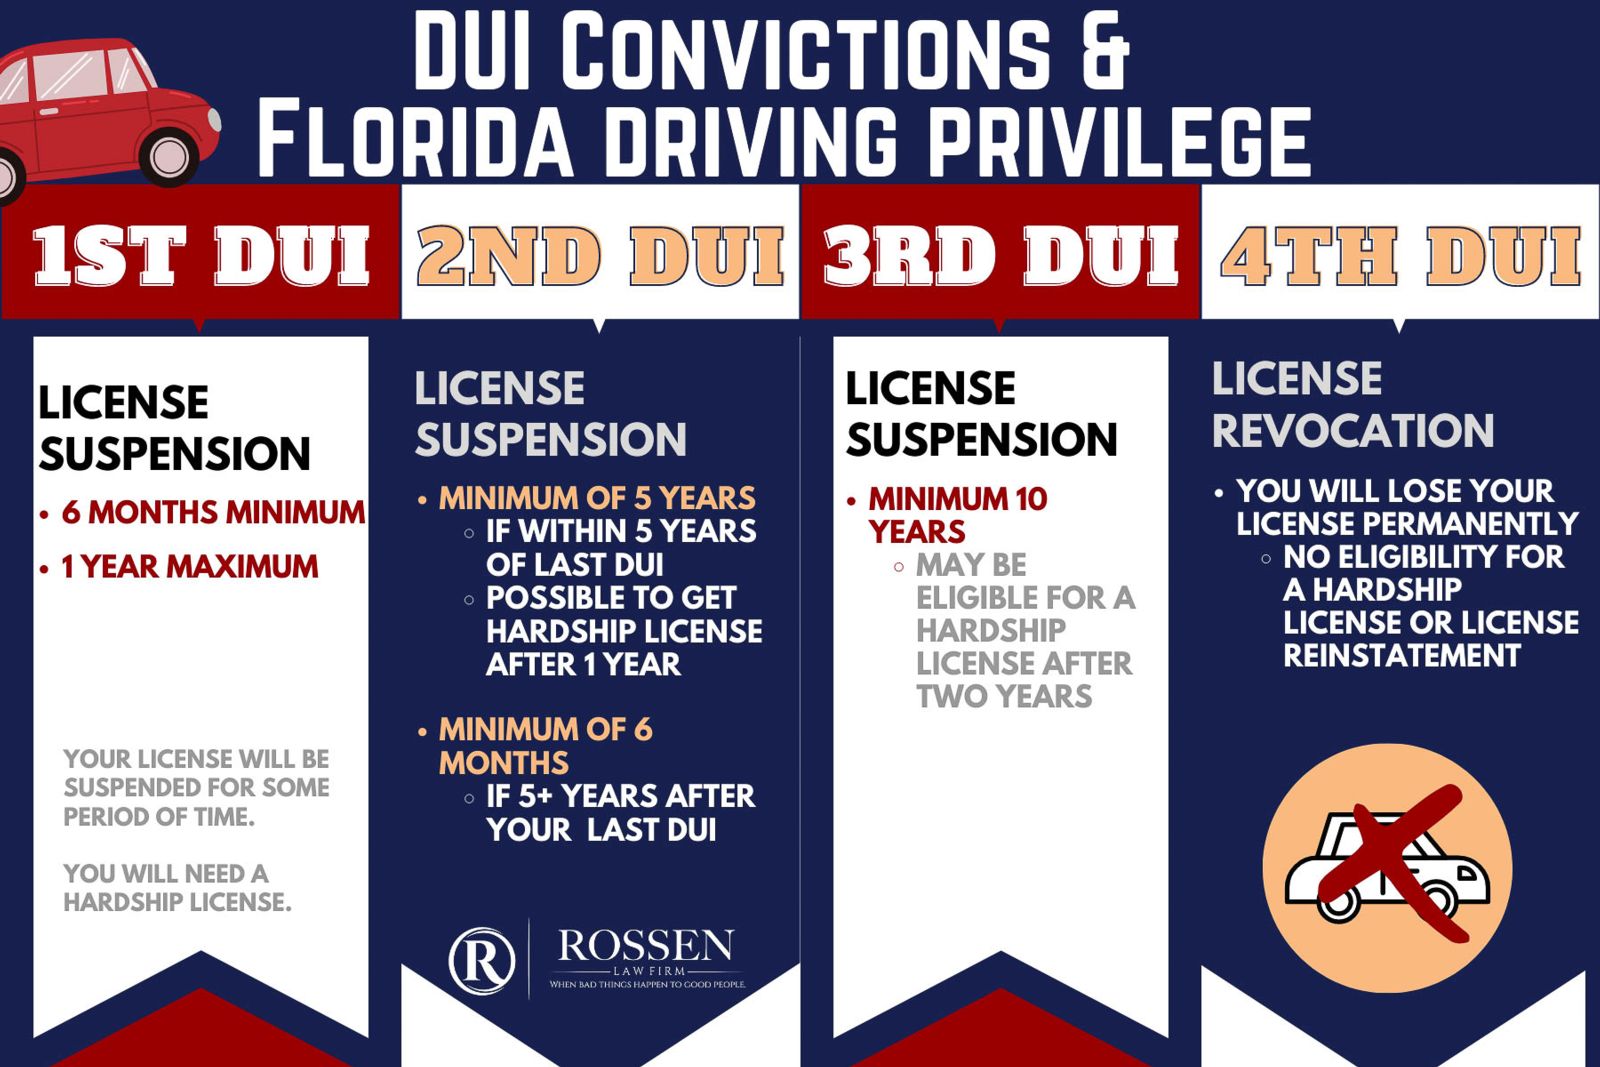 Florida DUI convictions and driving privileges for first, second, third and fourth DUI explained in an infographic